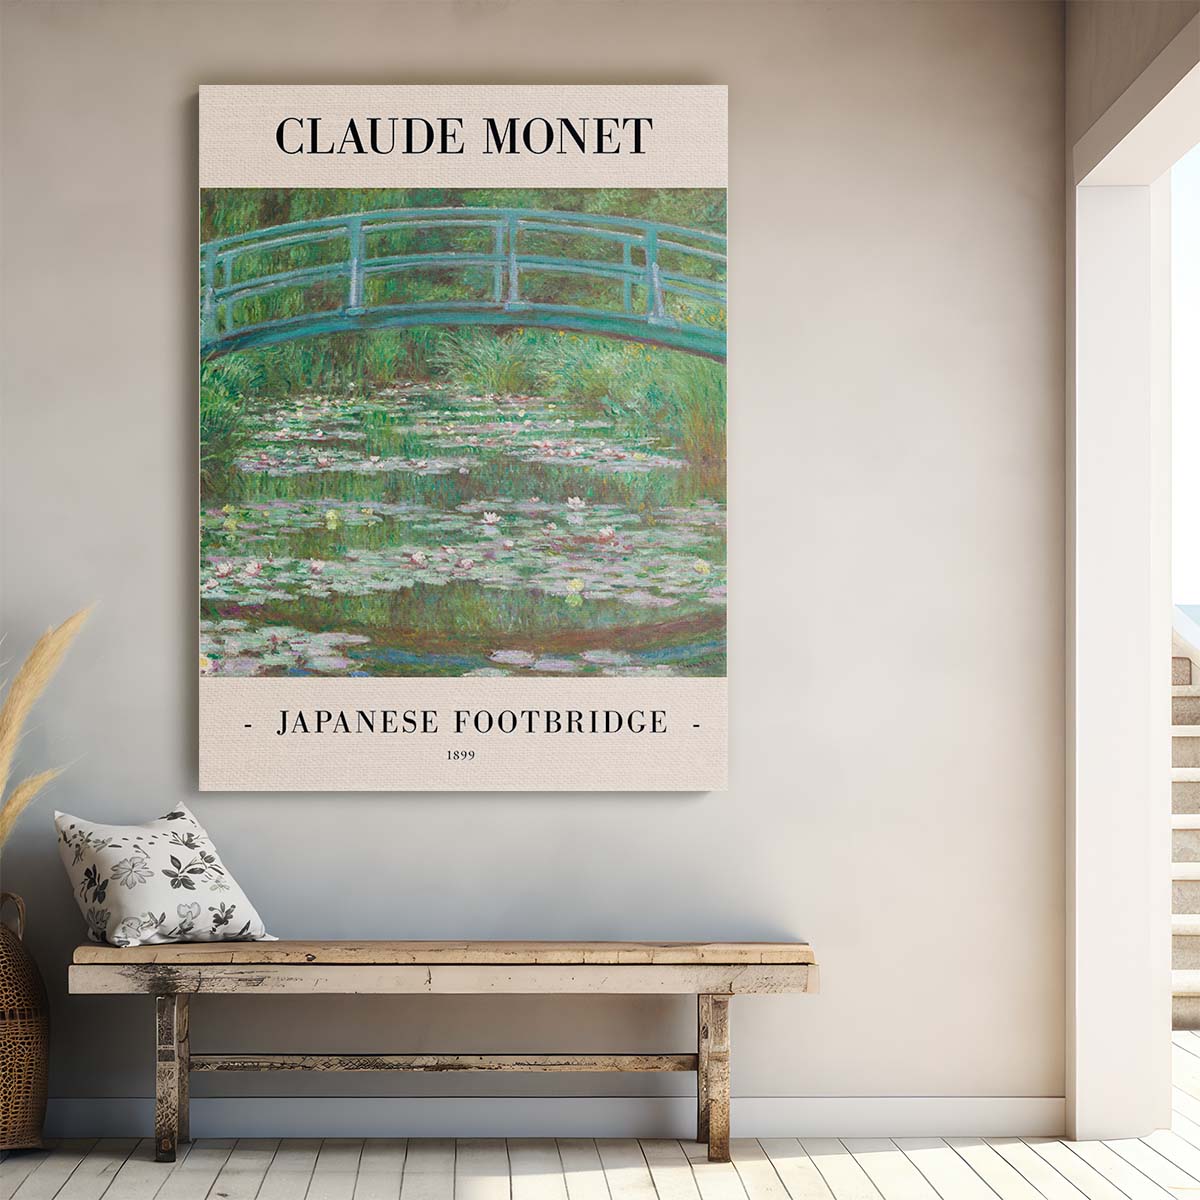 Claude Monet's 1899 Japanese Footbridge Oil Painting Illustration by Luxuriance Designs, made in USA